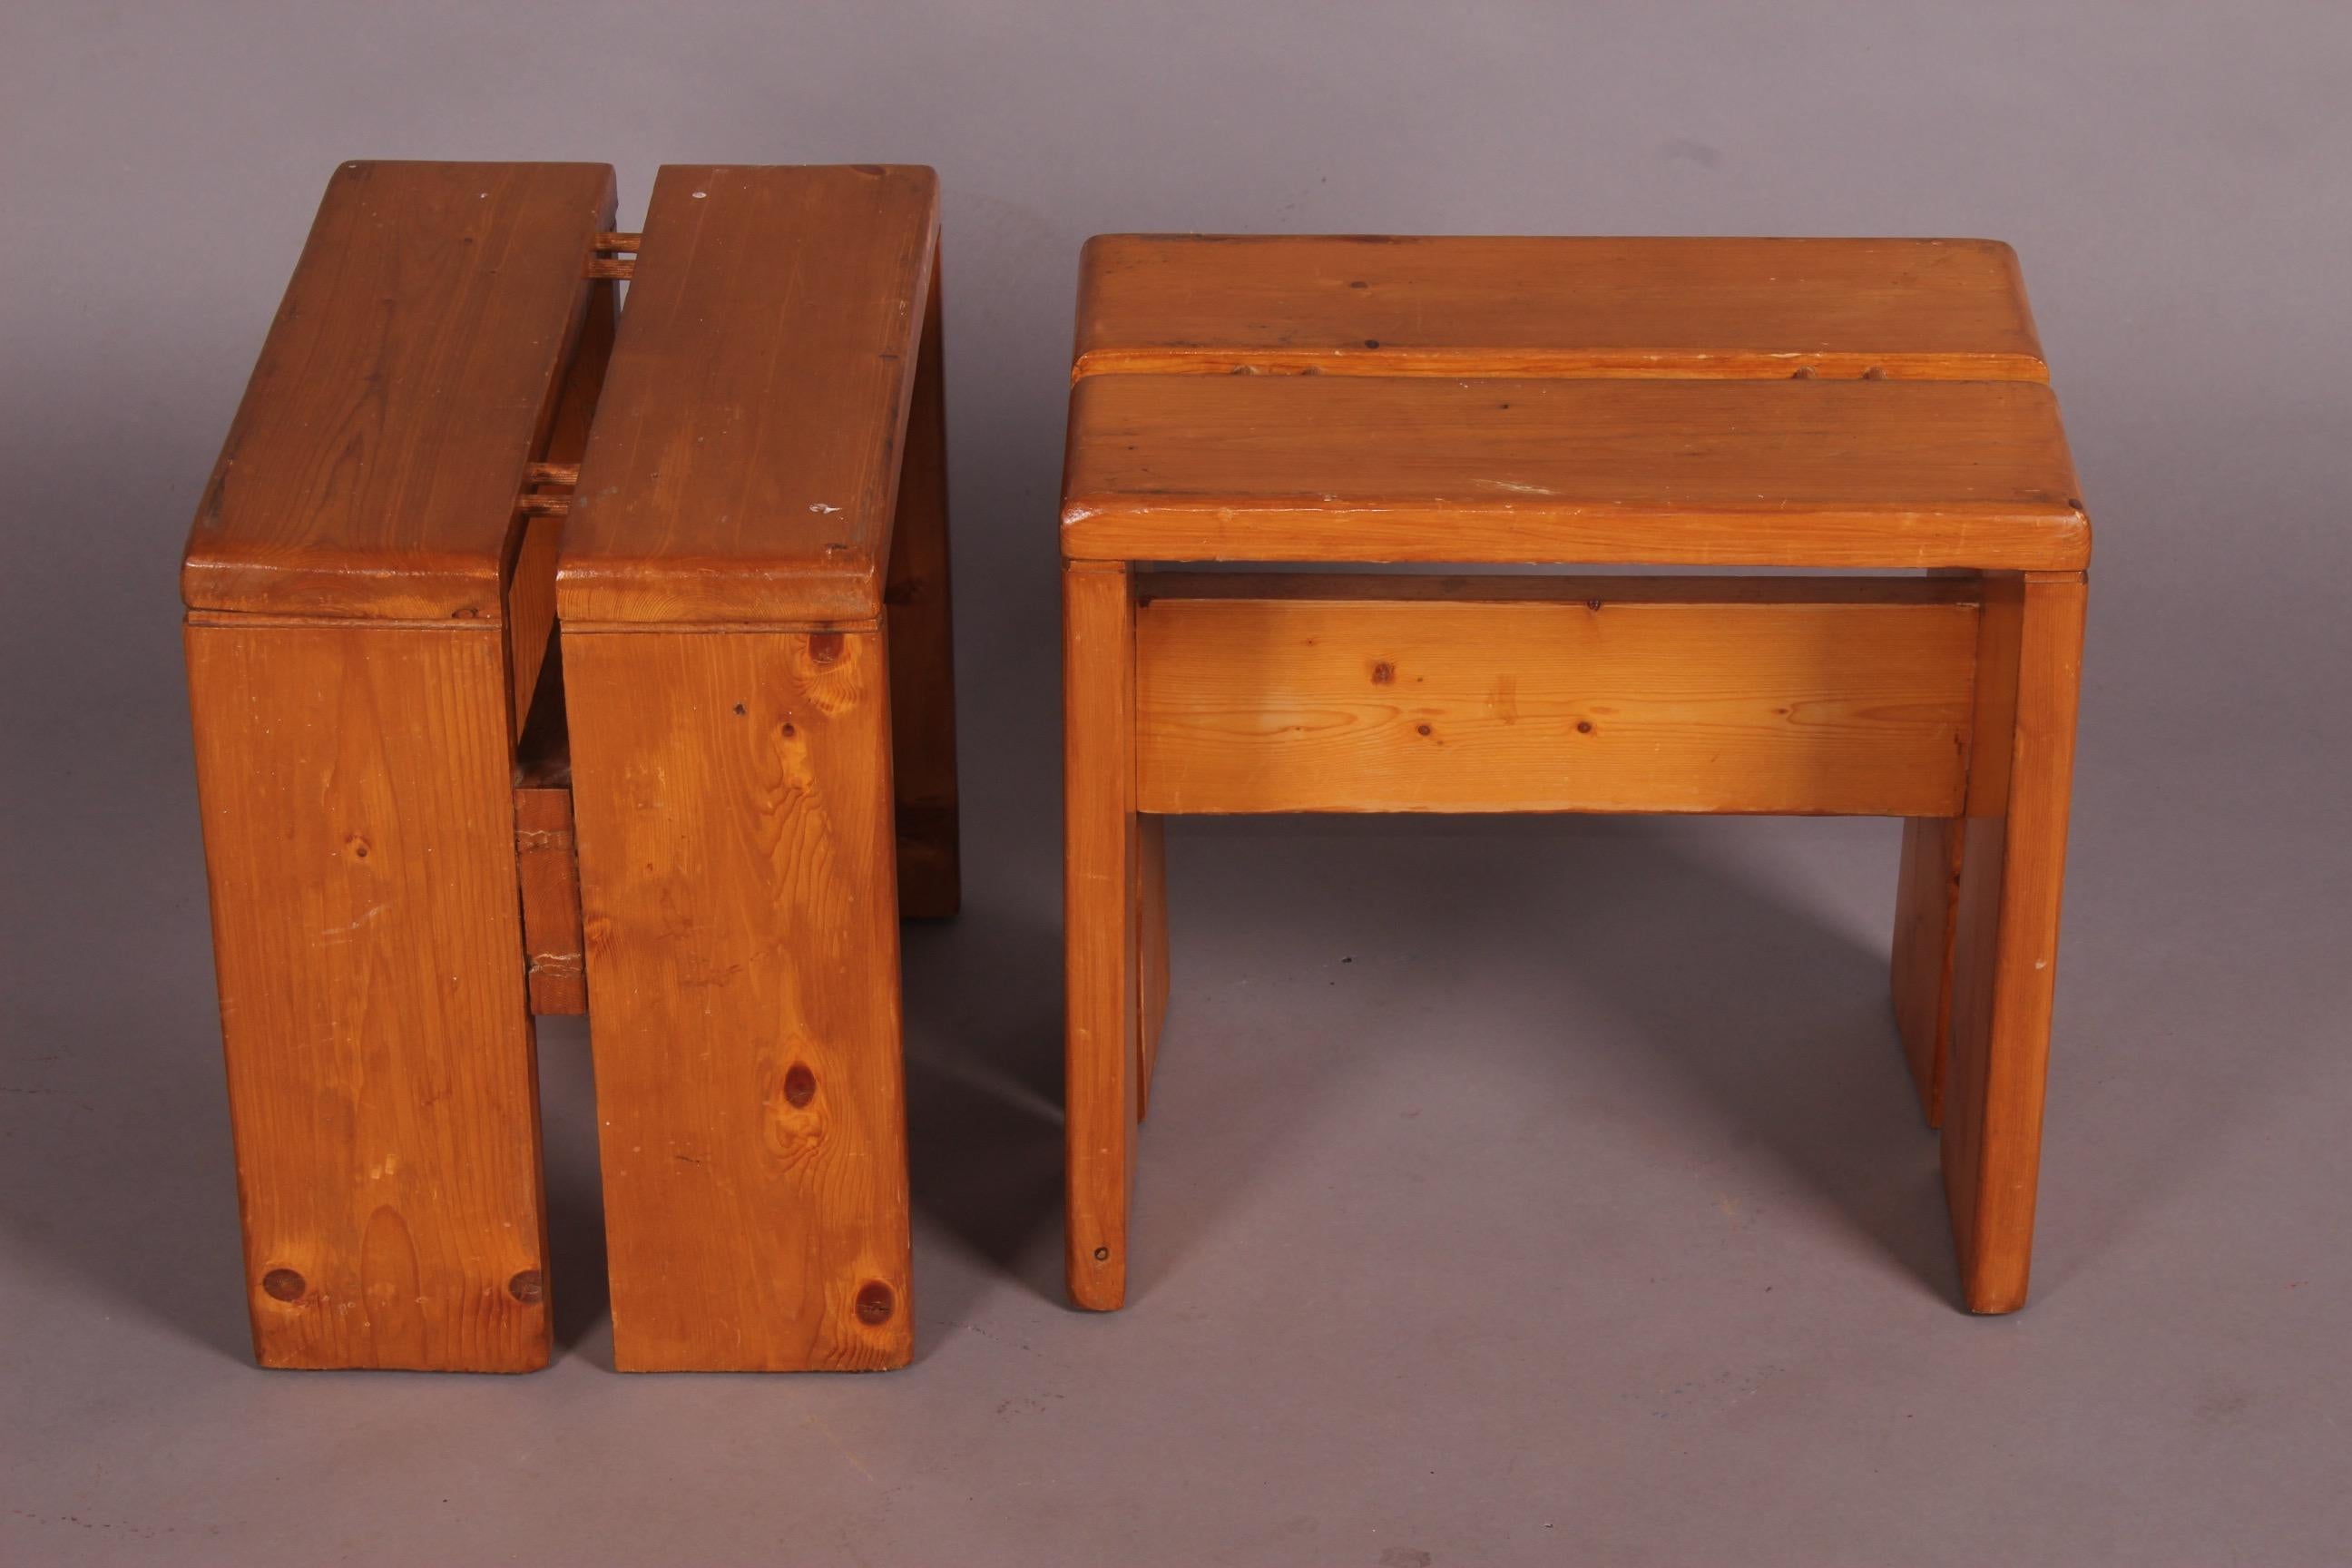 Pair of stools by Charlotte Perriand for Les Arcs, small repair. See on photo.